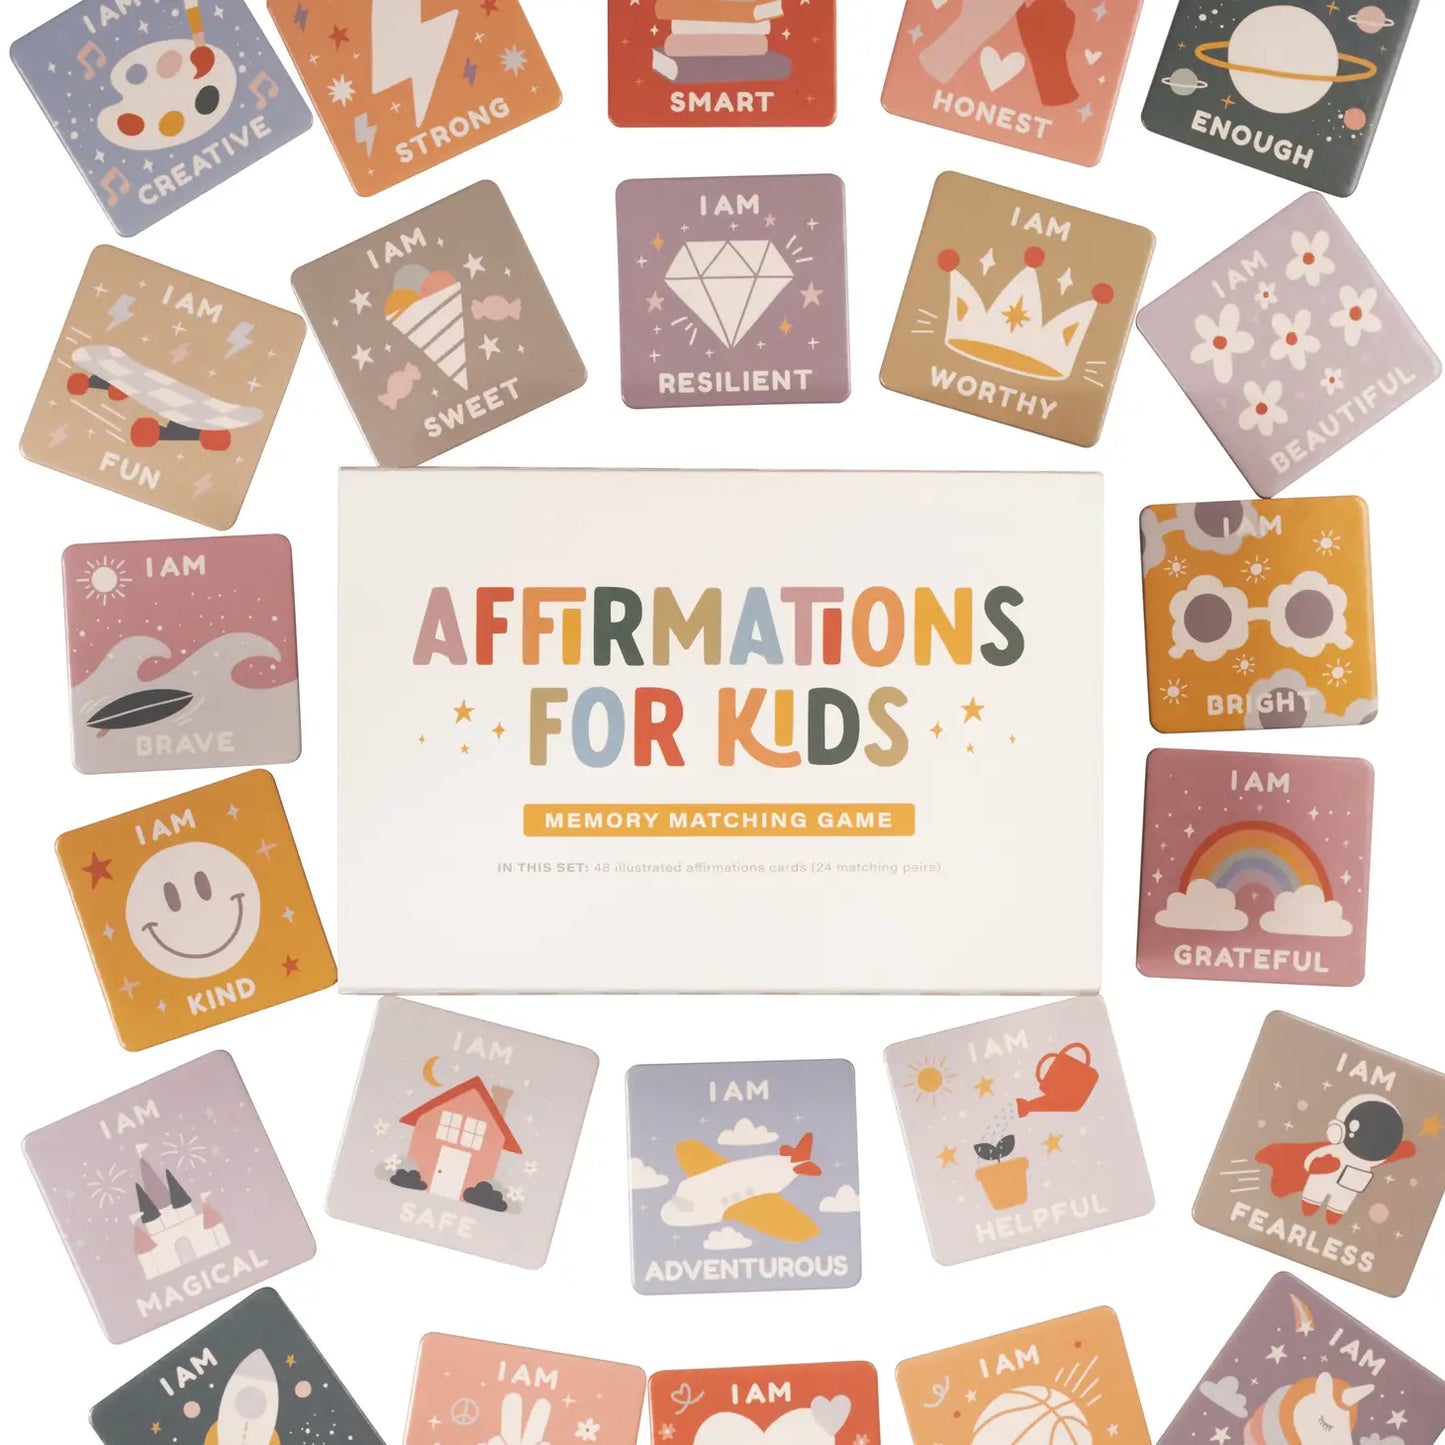 Cherrypick - Affirmations for Kids Memory Matching Game